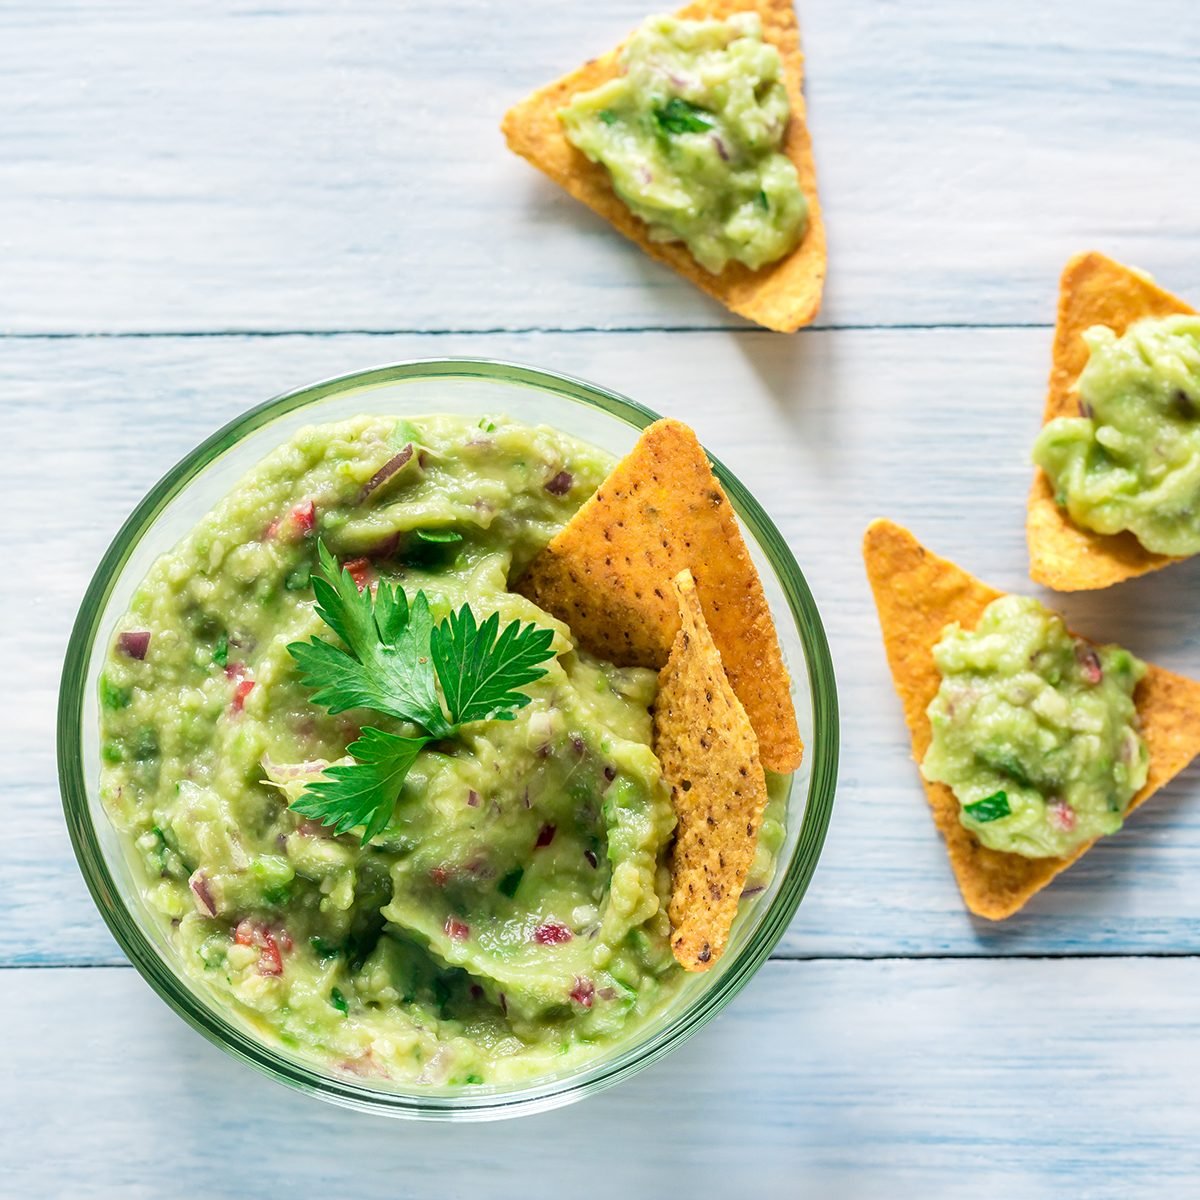 Bowl of guacamole with tortilla chips